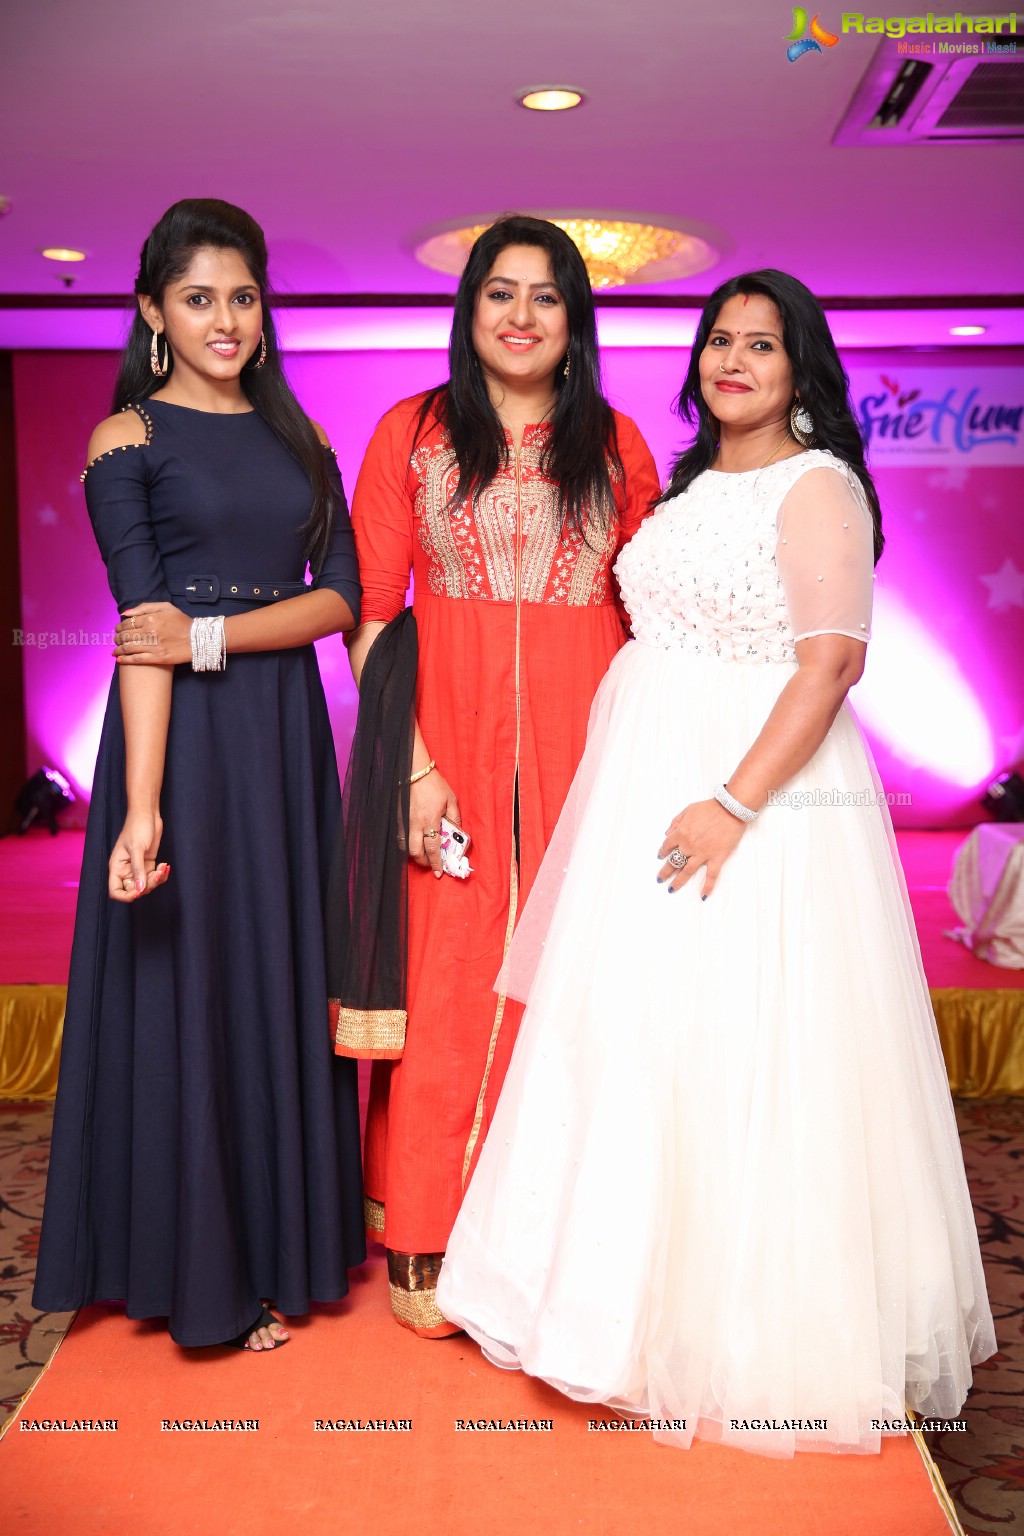 Queenslounge Kitty Event at Taj Banjara - Hosted by Sneha Chowdary